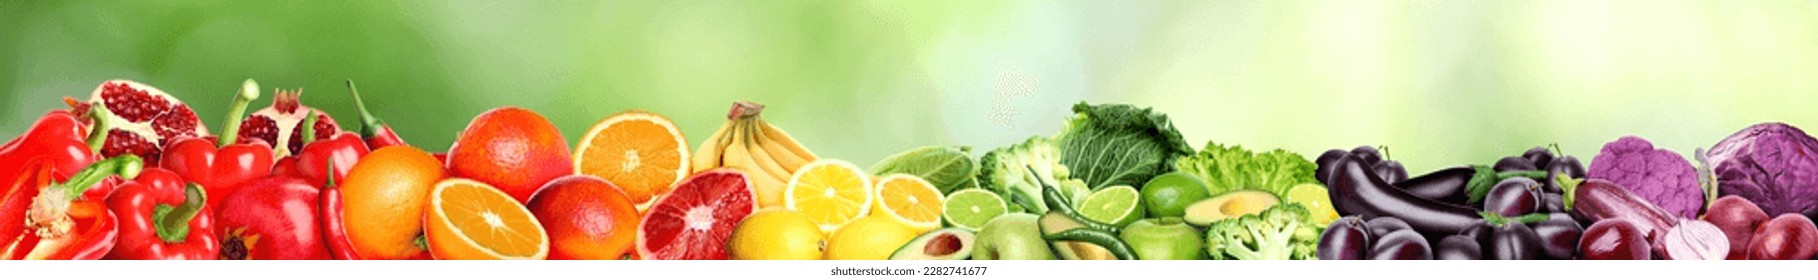 Many different fresh fruits and vegetables against blurred green background. Banner design - Shutterstock ID 2282741677